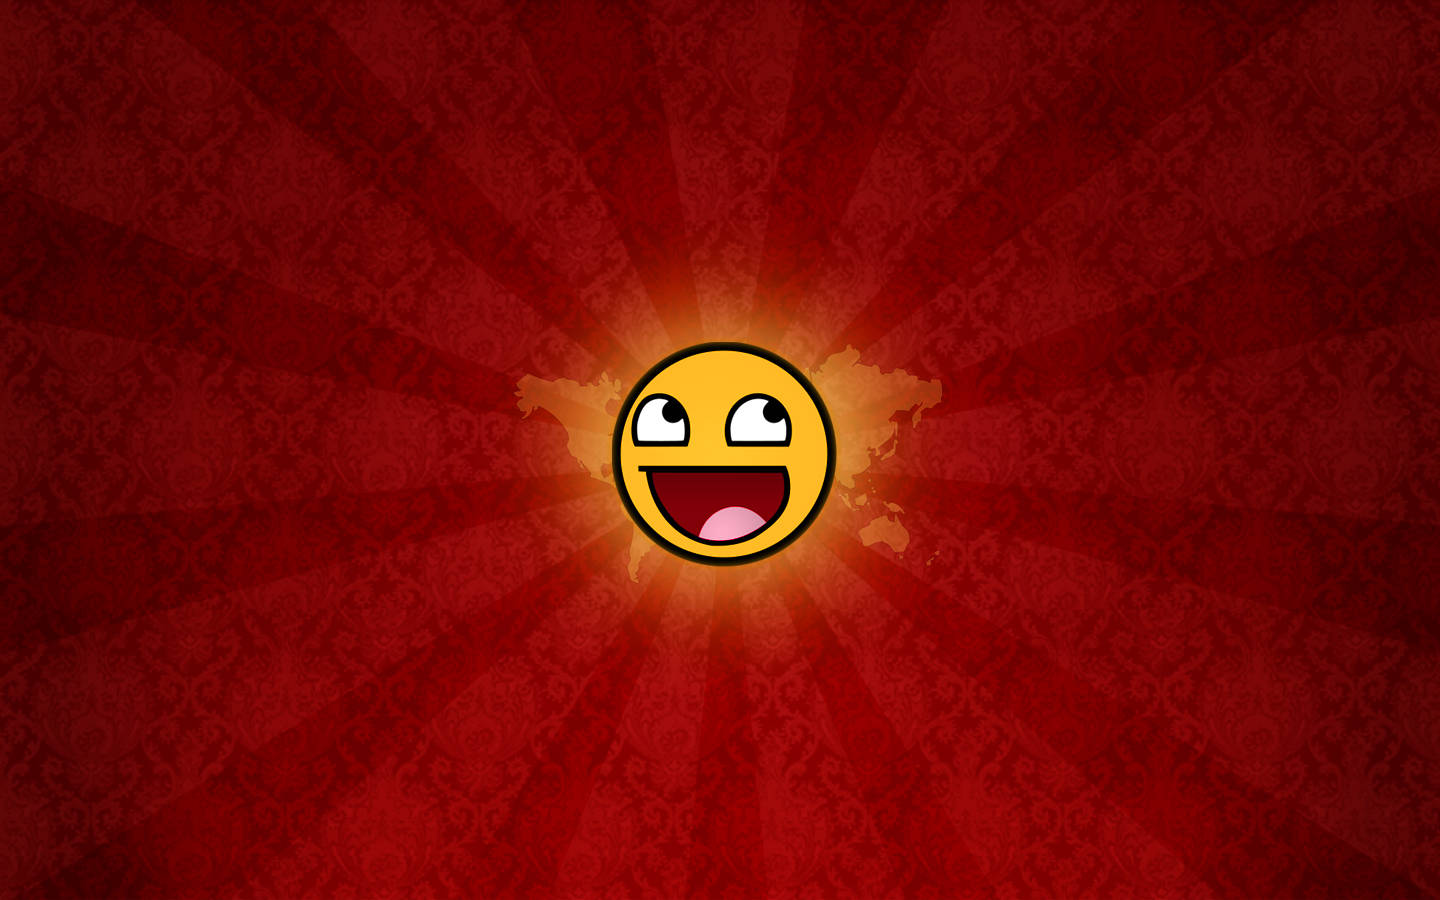 smiley awesome face 1920x1200 wallpaper digital awesome face hd art hd 1440x900